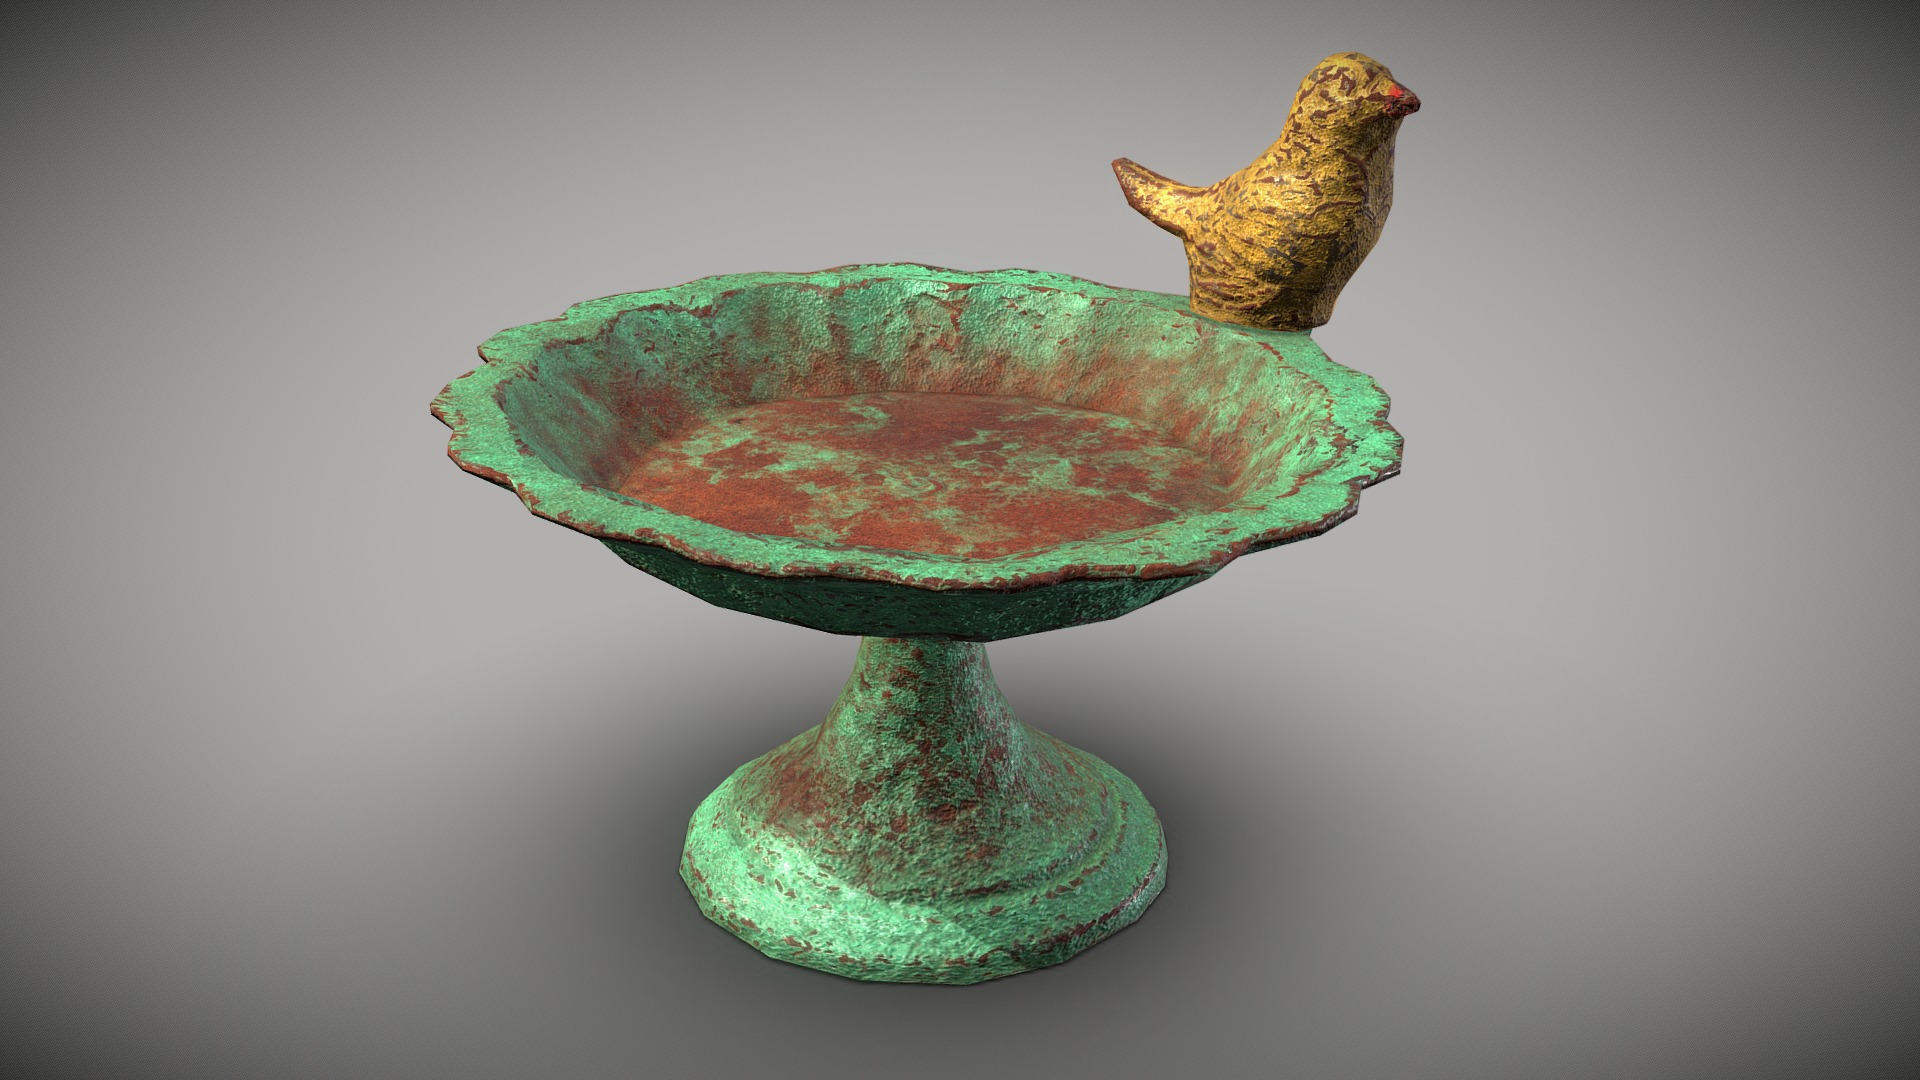 3D model Bird bath – Garden decoration - This is a 3D model of the Bird bath - Garden decoration. The 3D model is about a bird sitting on a watermelon.